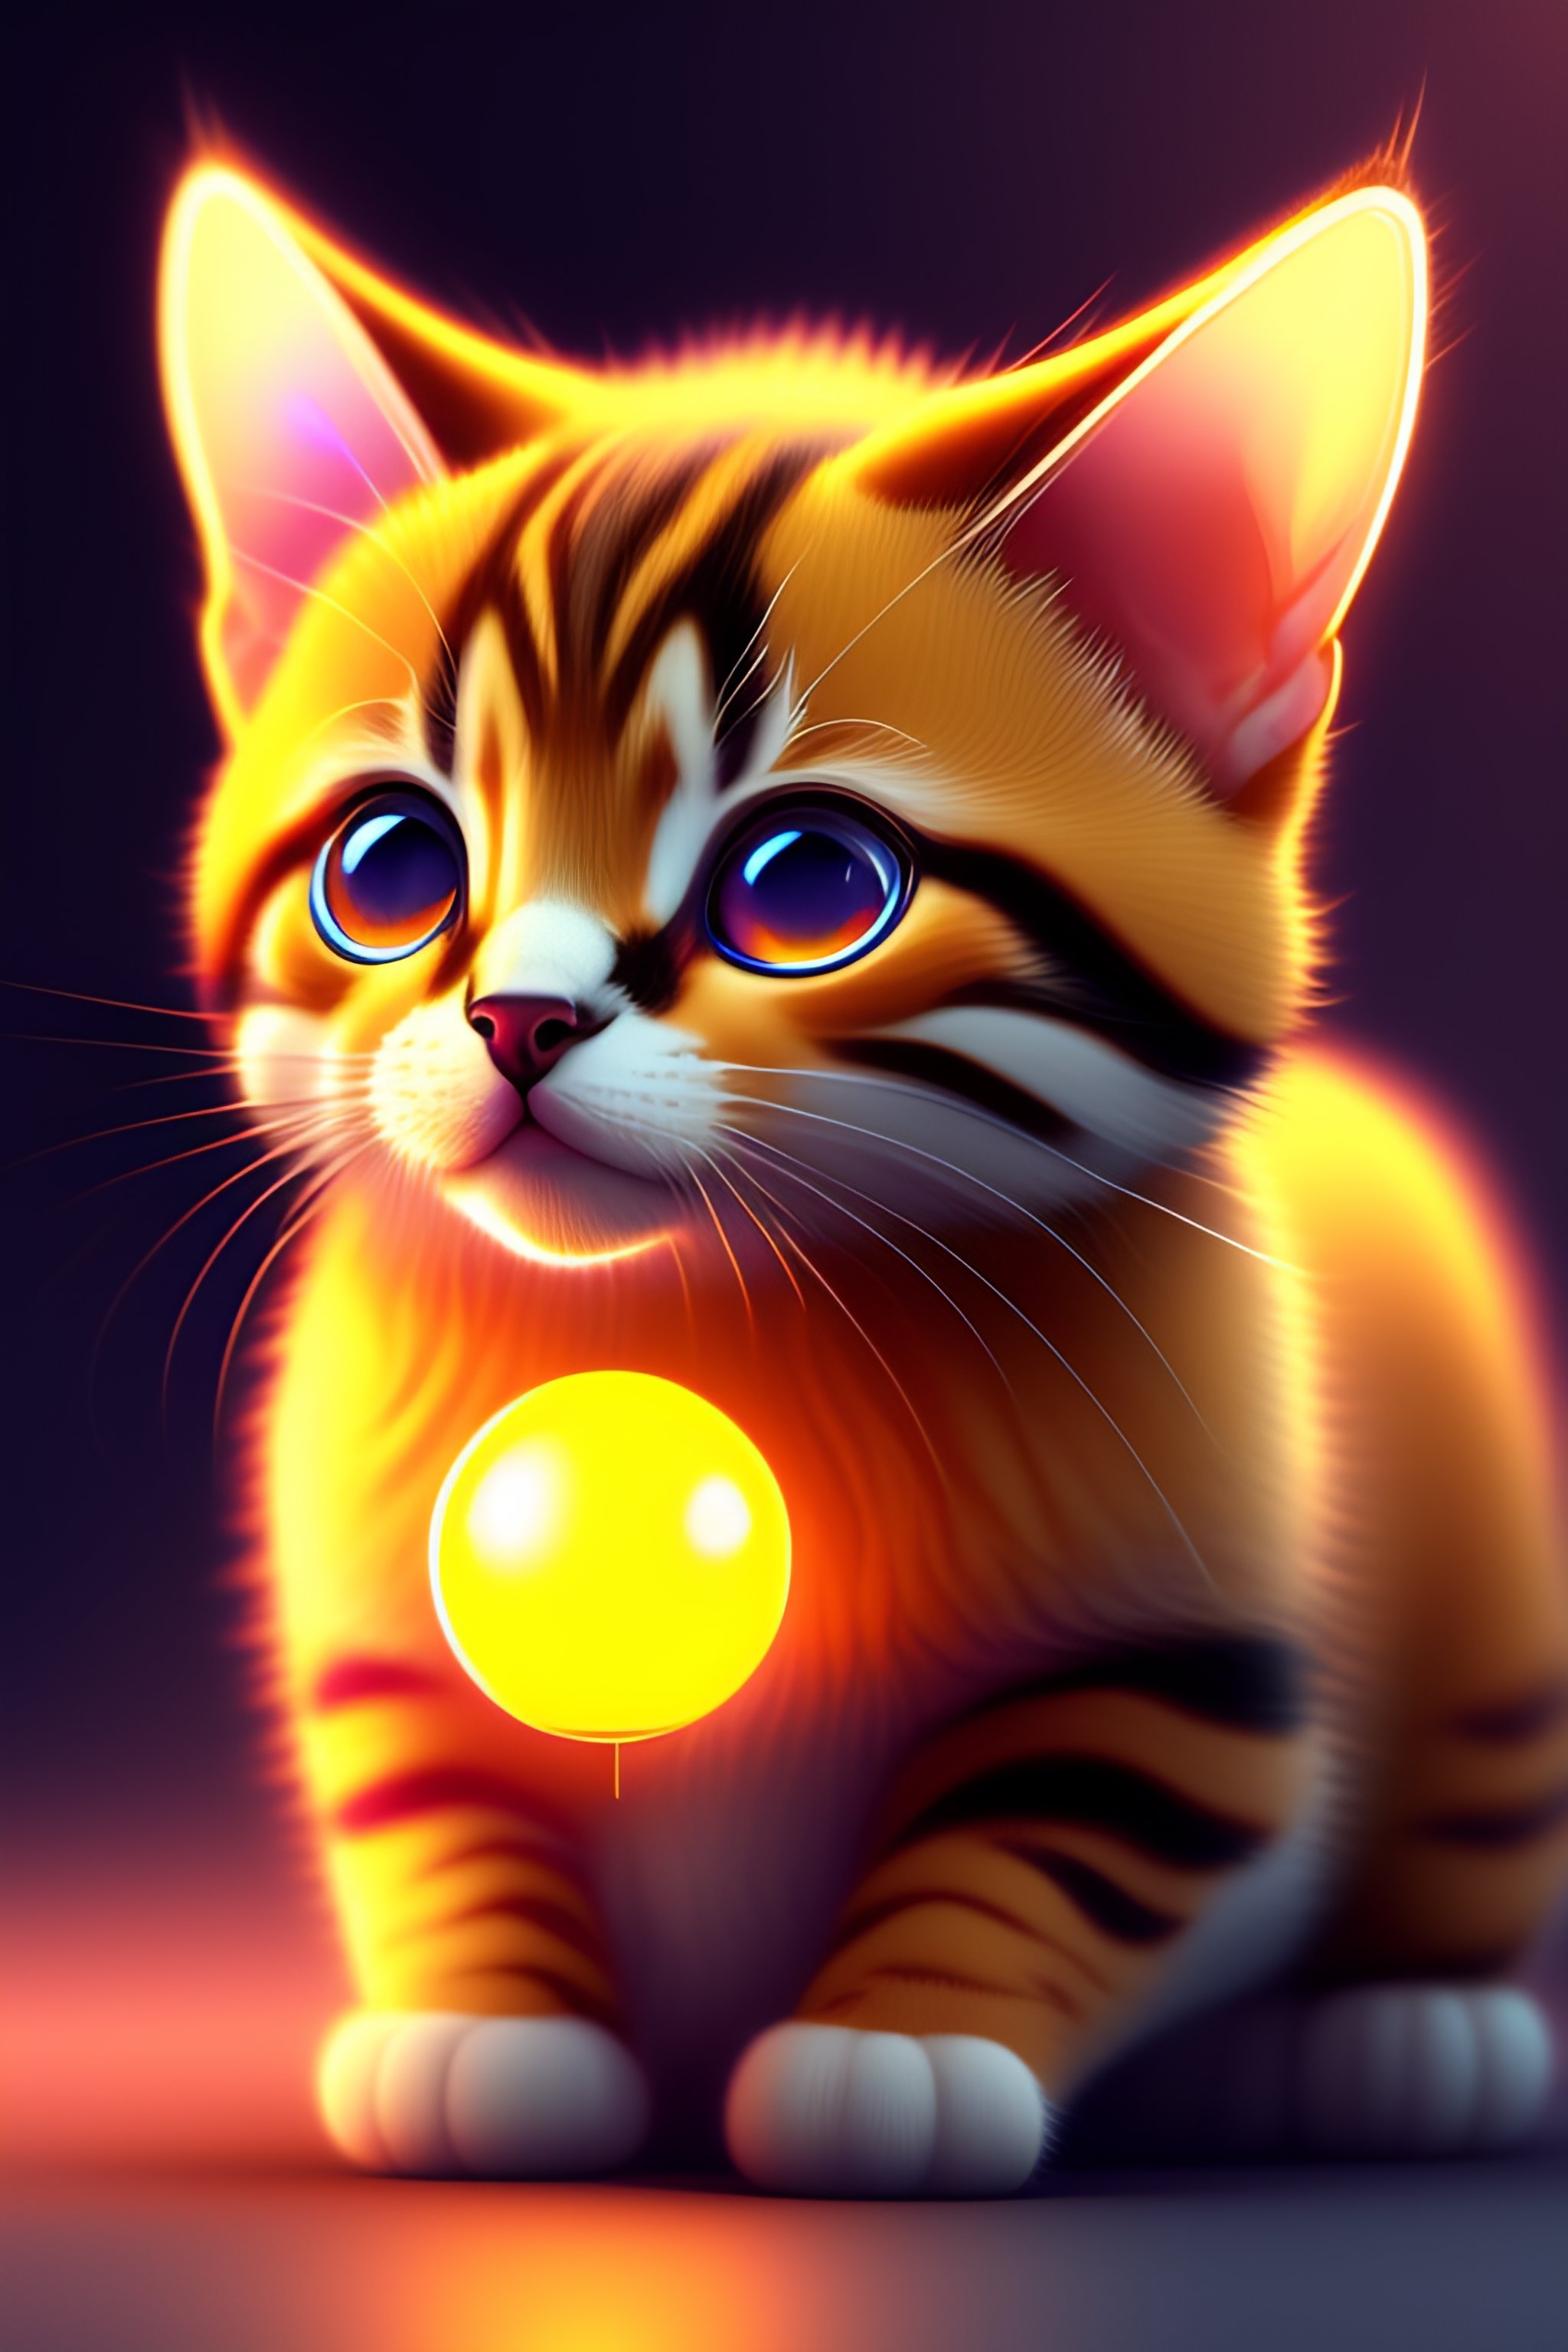 Lexica - A cute angry adorable baby cat made of crystal ball with low poly  eye's surrounded by glowing aura highly detailed intricated concept art  tr